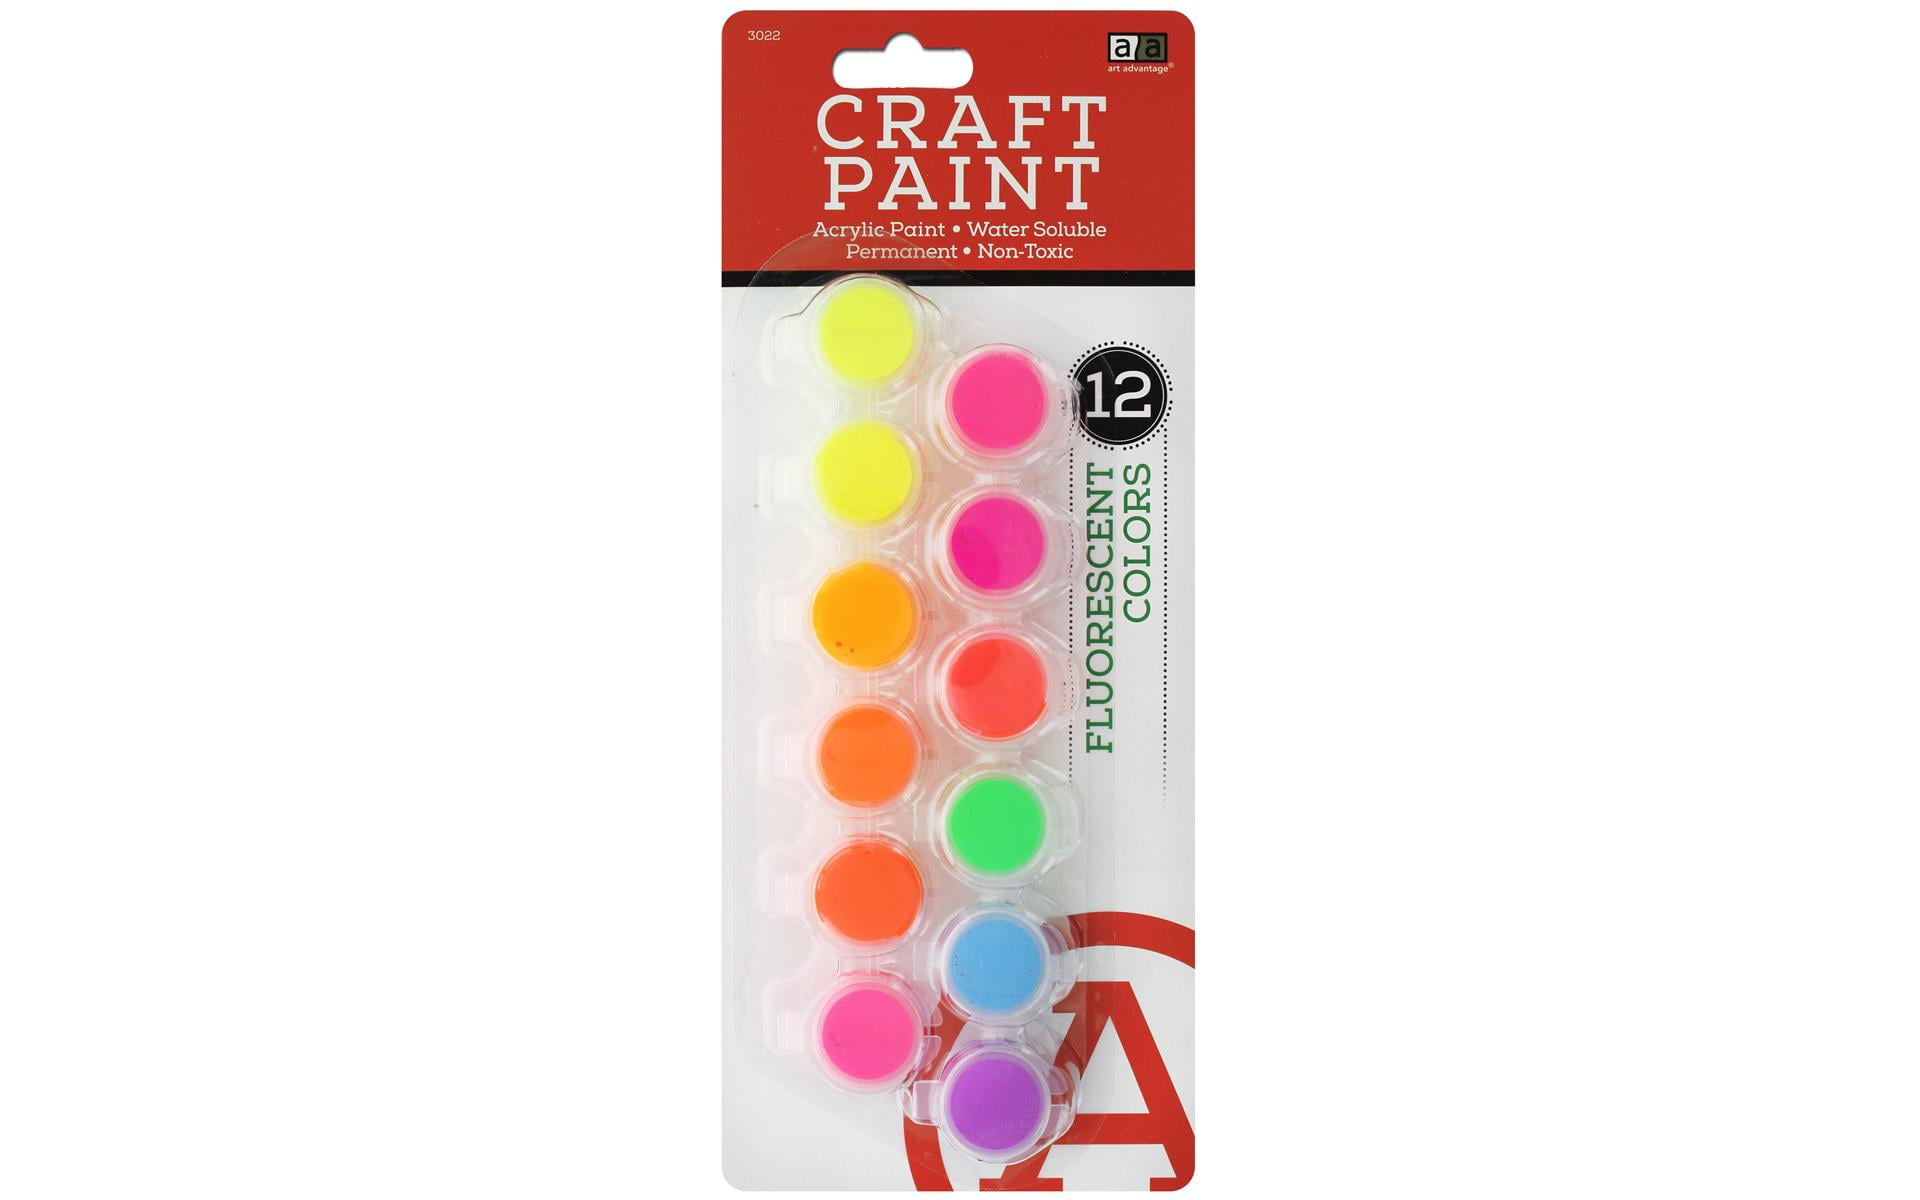 Chameleon Color-Shifting Iridescent Acrylic Paint 12-Piece